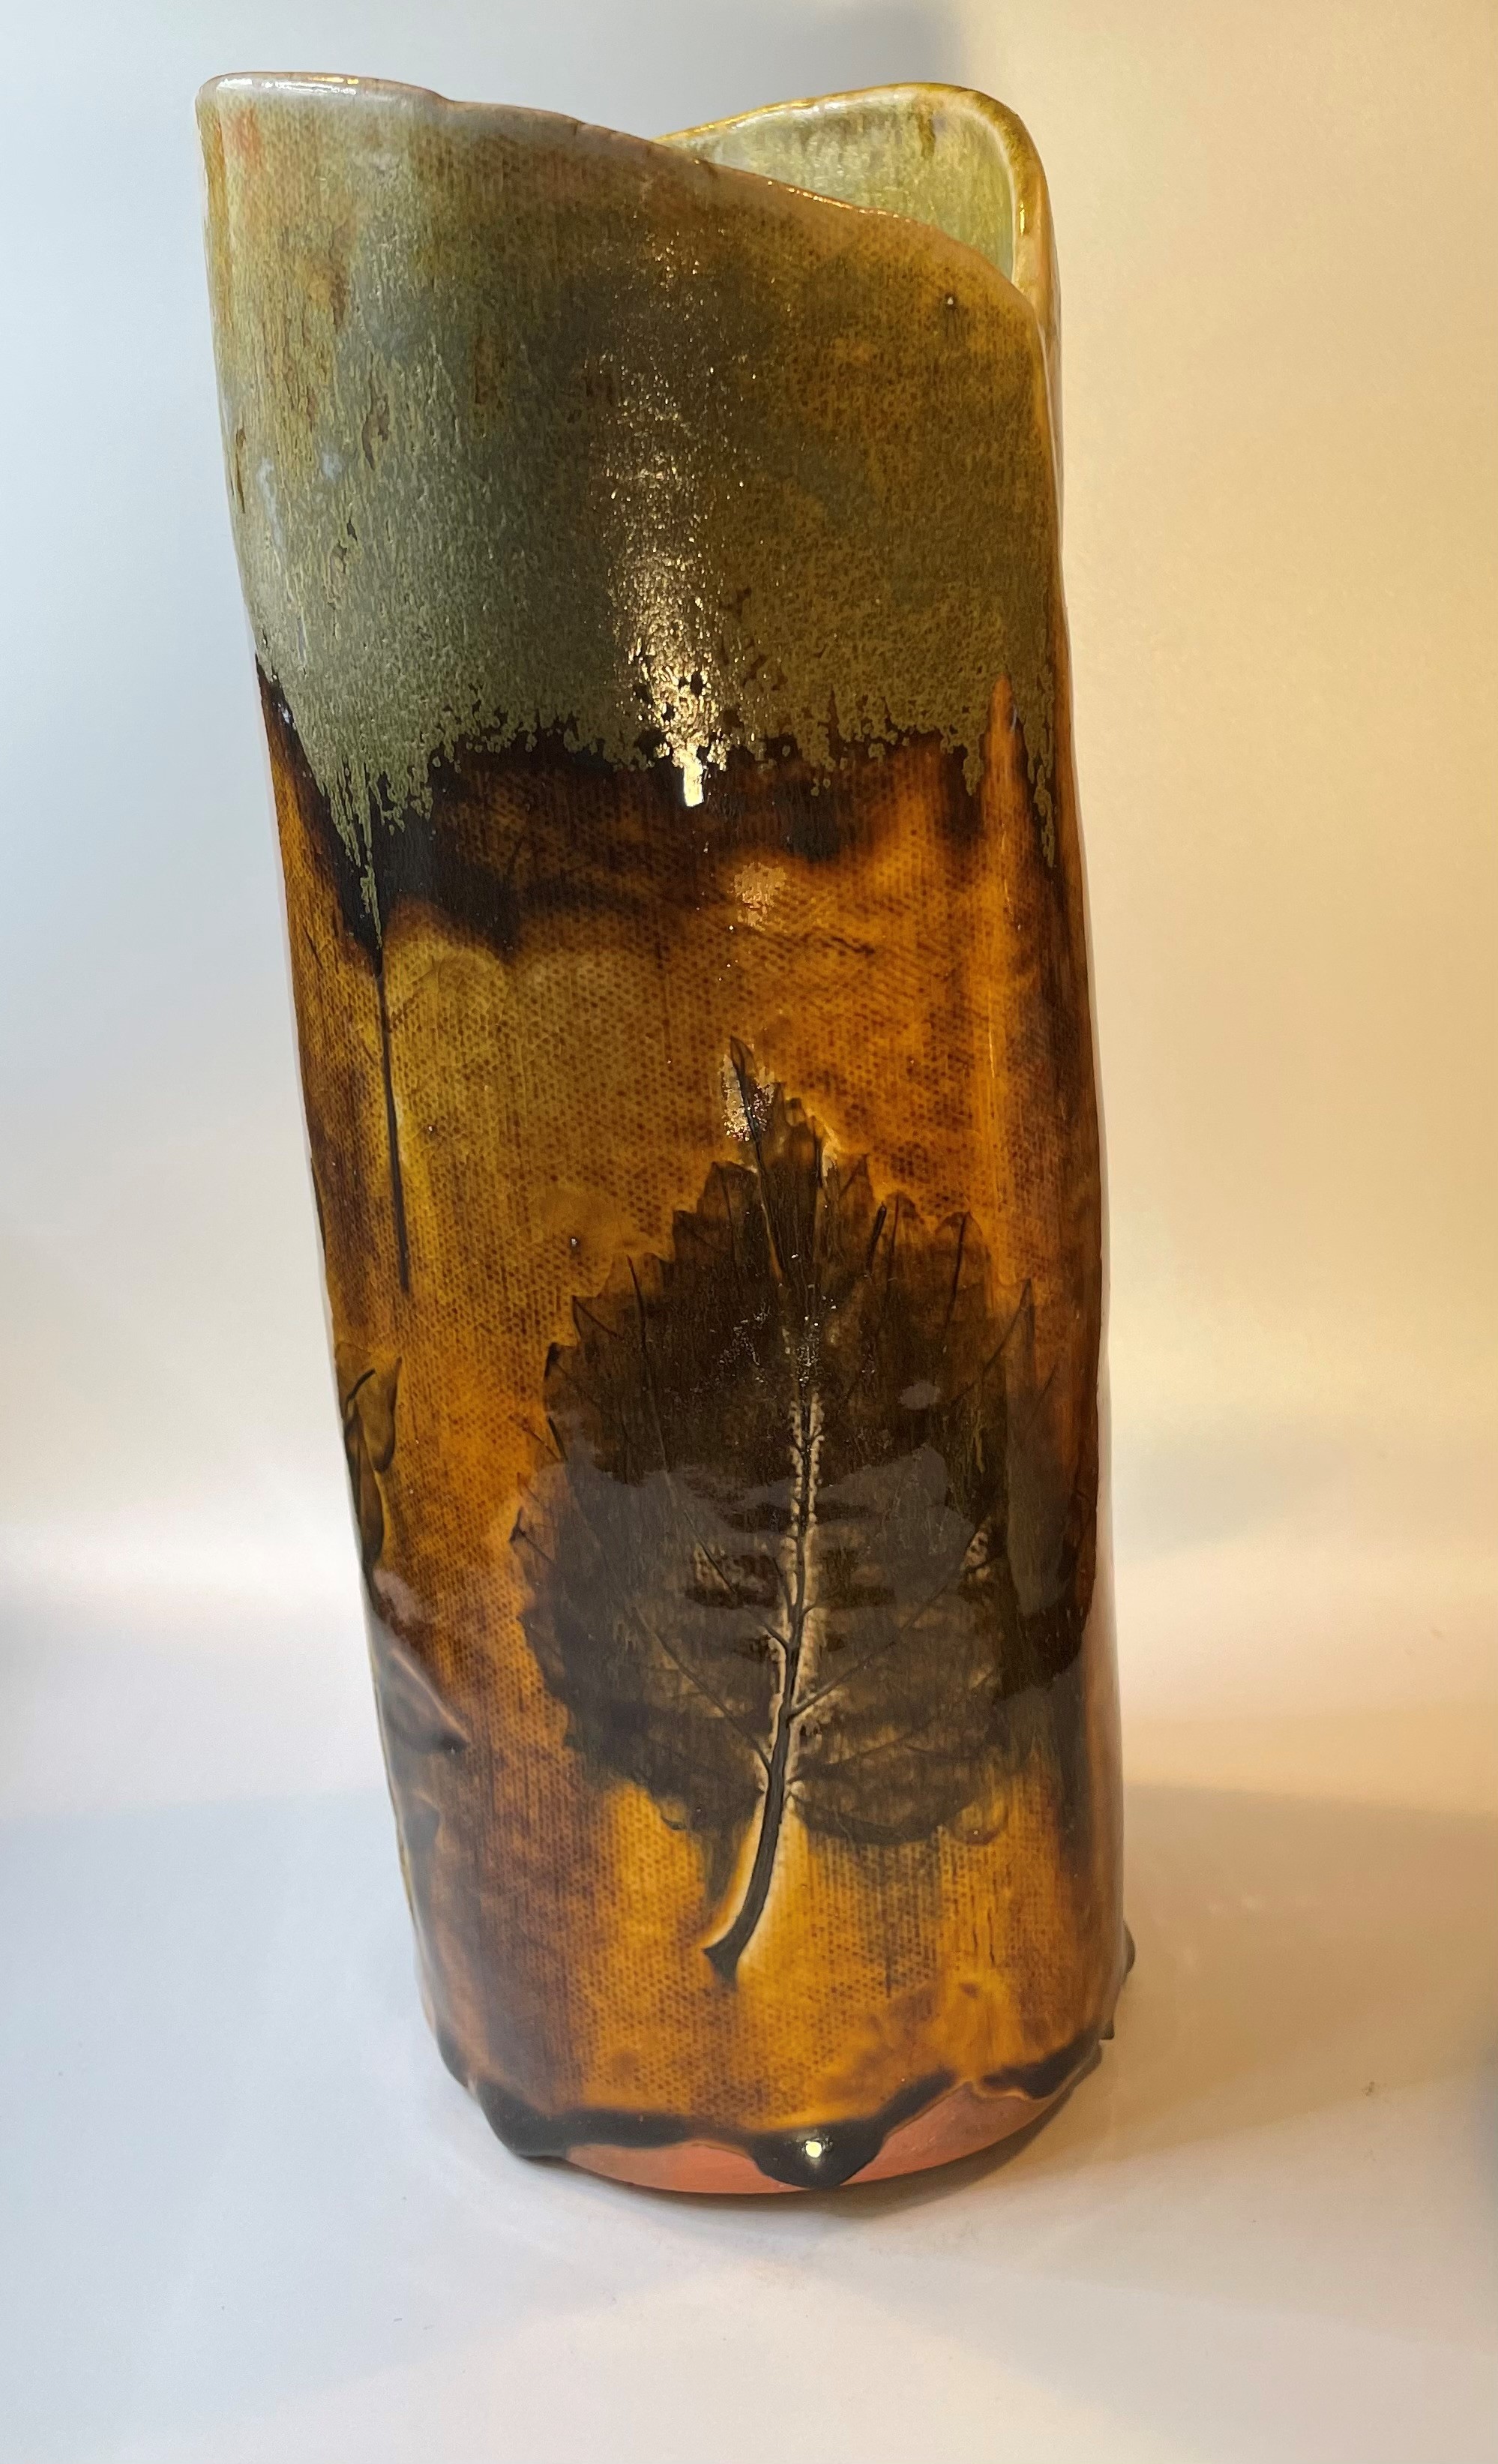 Photograph of tan vase with brown flower imprint